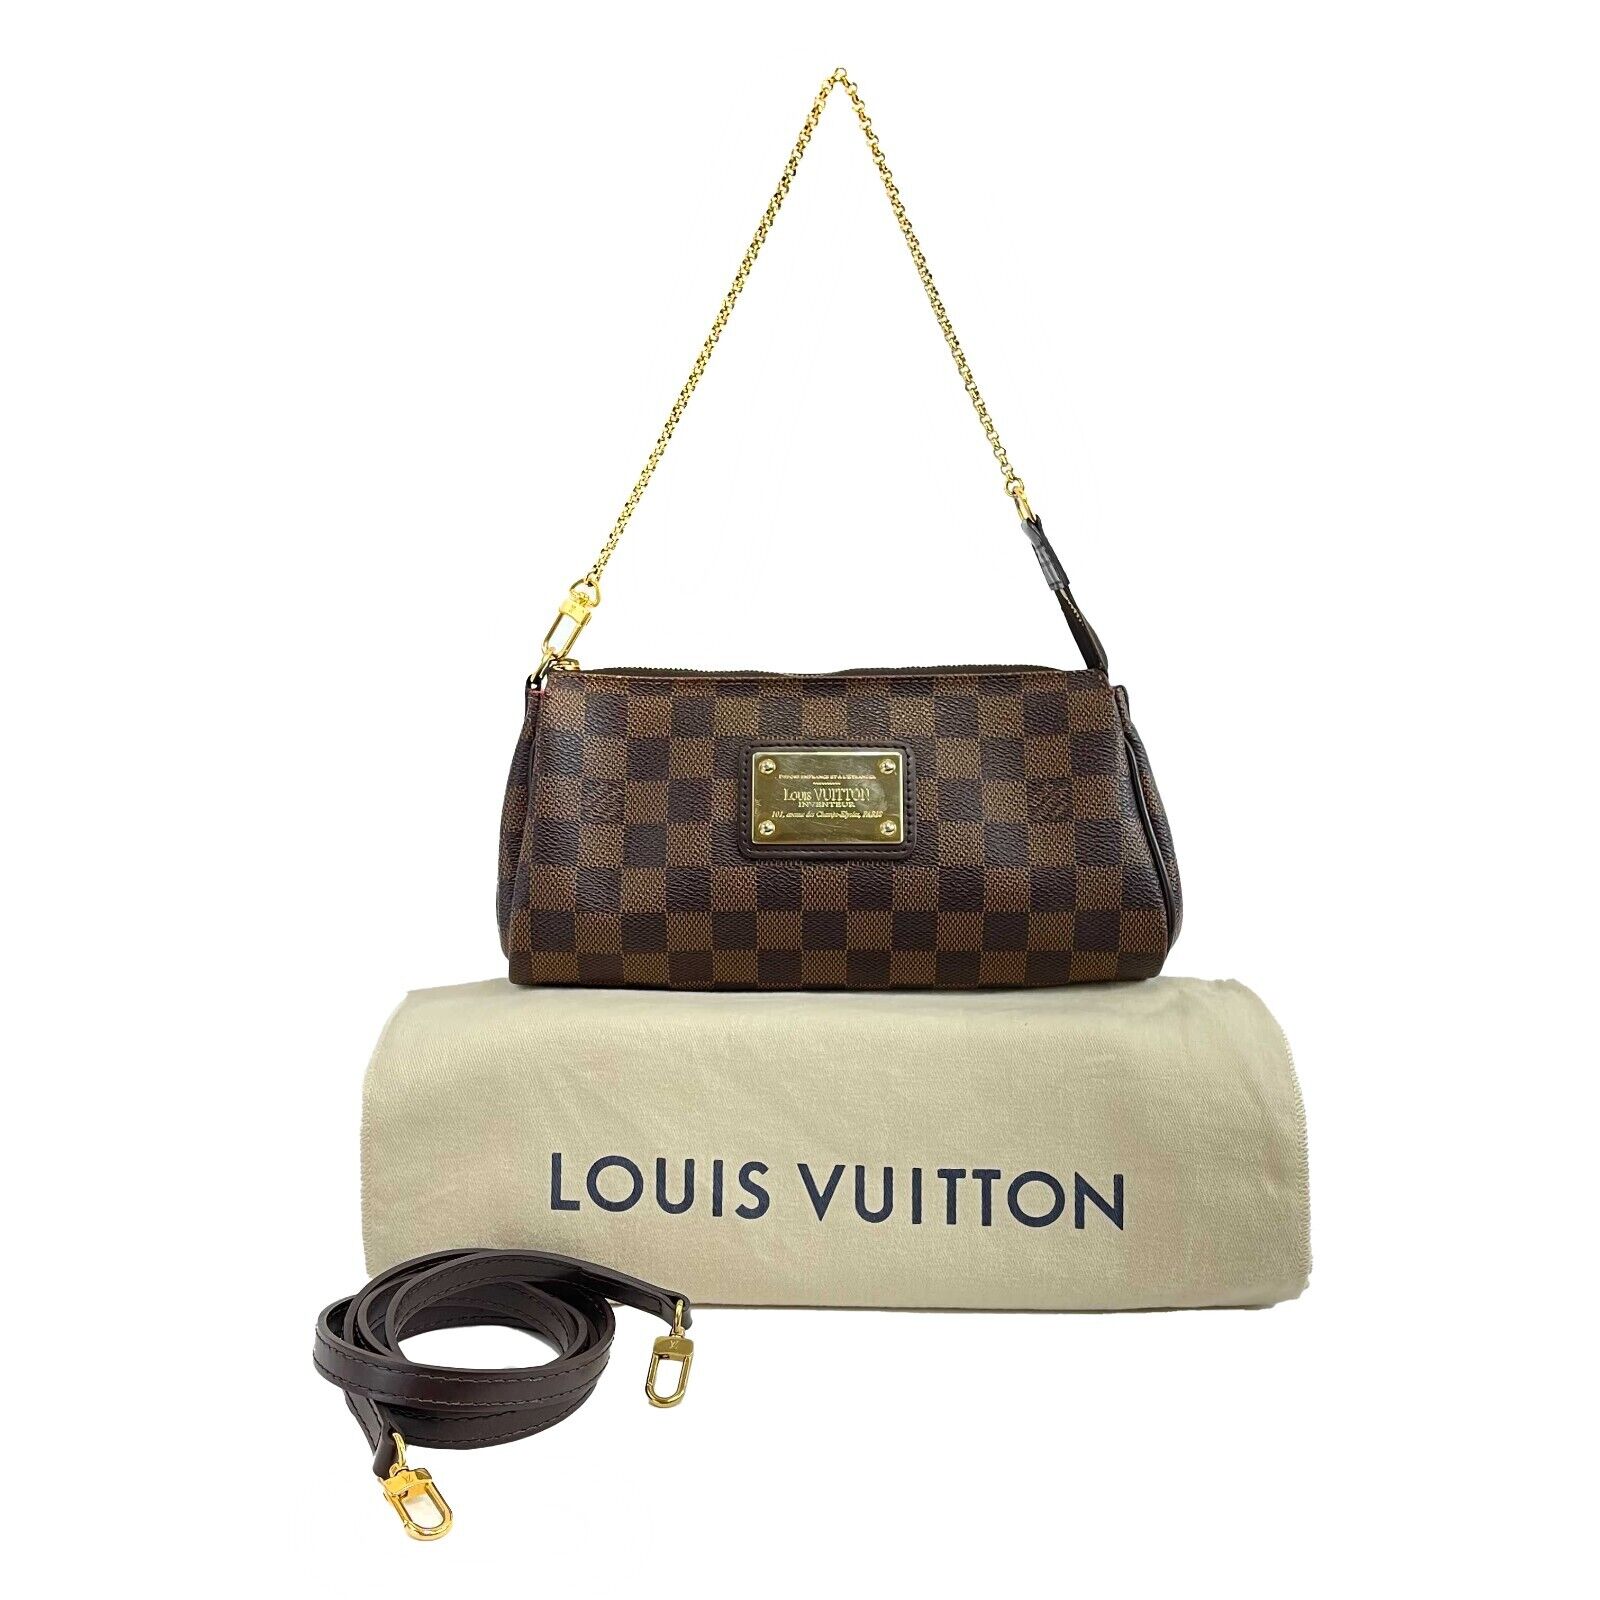 LOUIS VUITTON Paint Can Bag Green Monogram Crossbody/Tote NEW LV